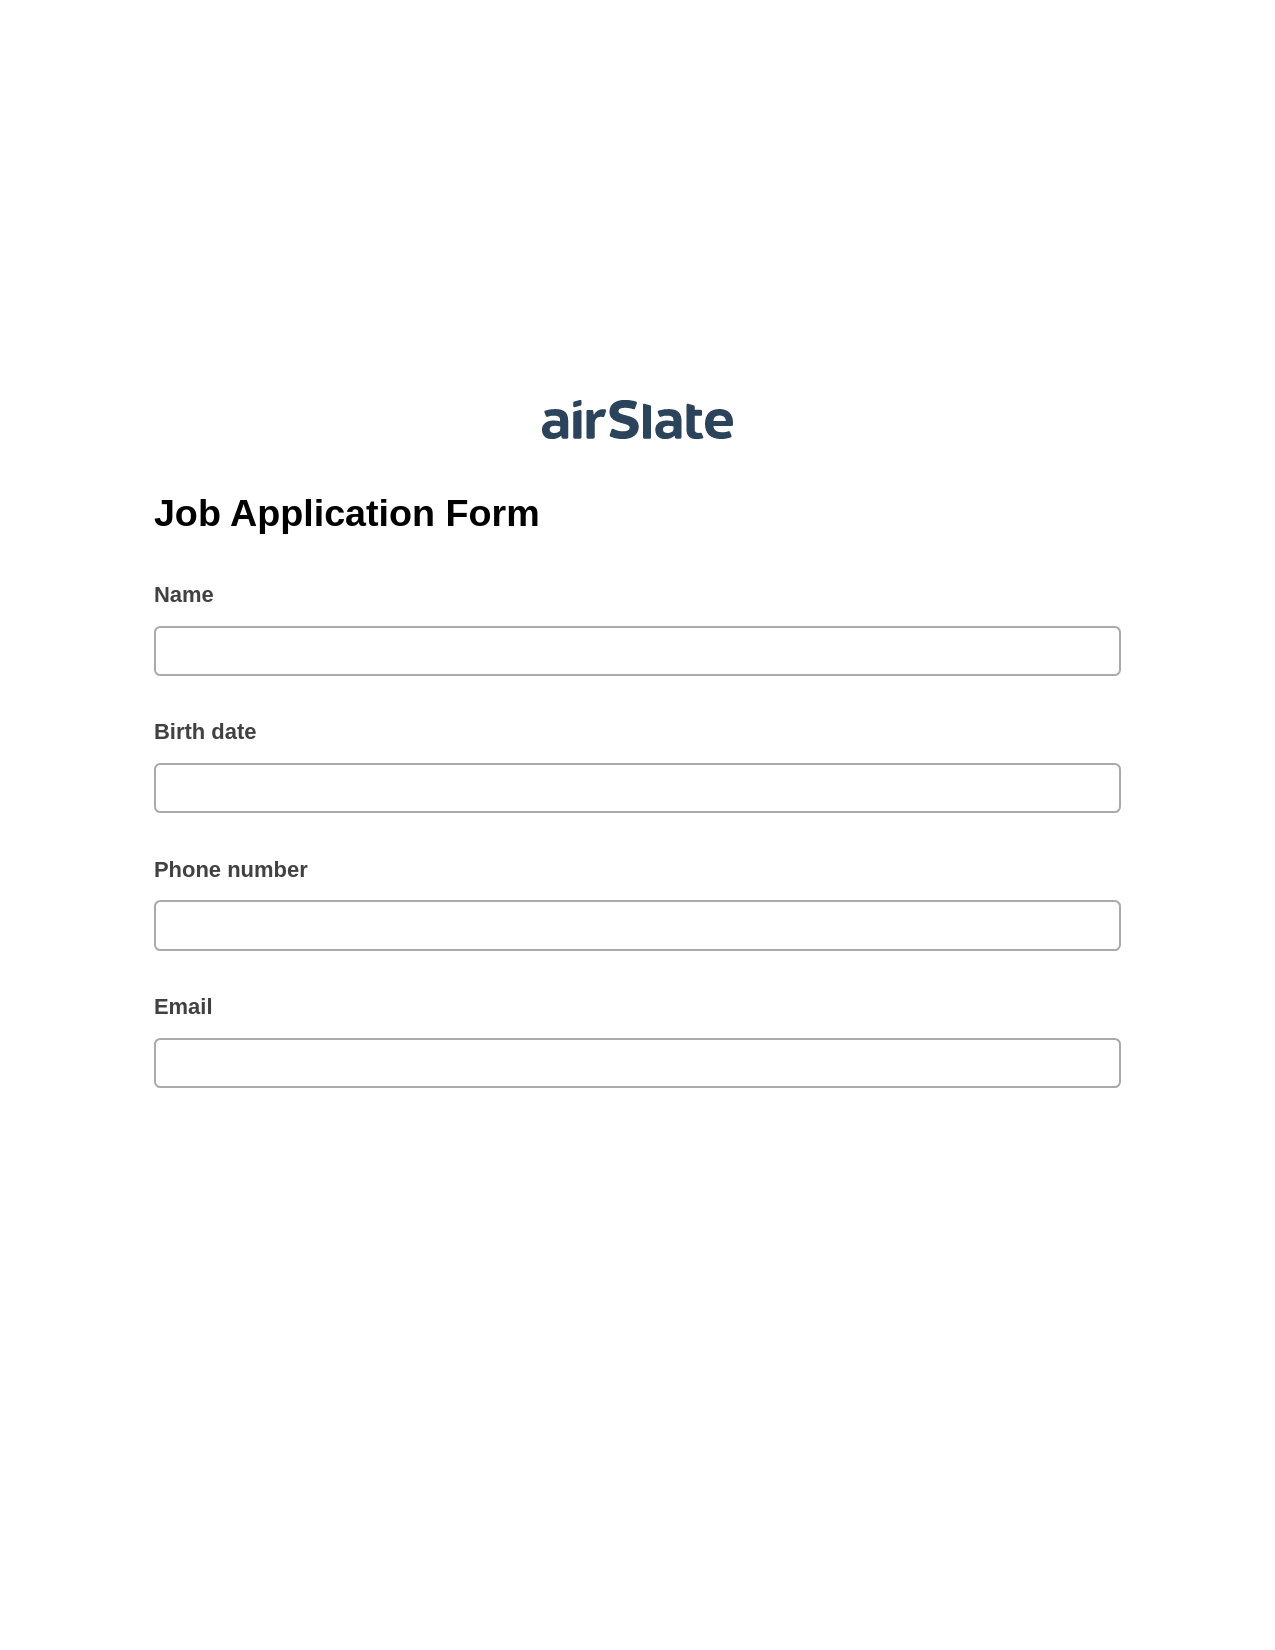 Multirole Job Application Form Pre-fill from Google Sheets Bot, Create Slate from another Flow Bot, Archive to SharePoint Folder Bot